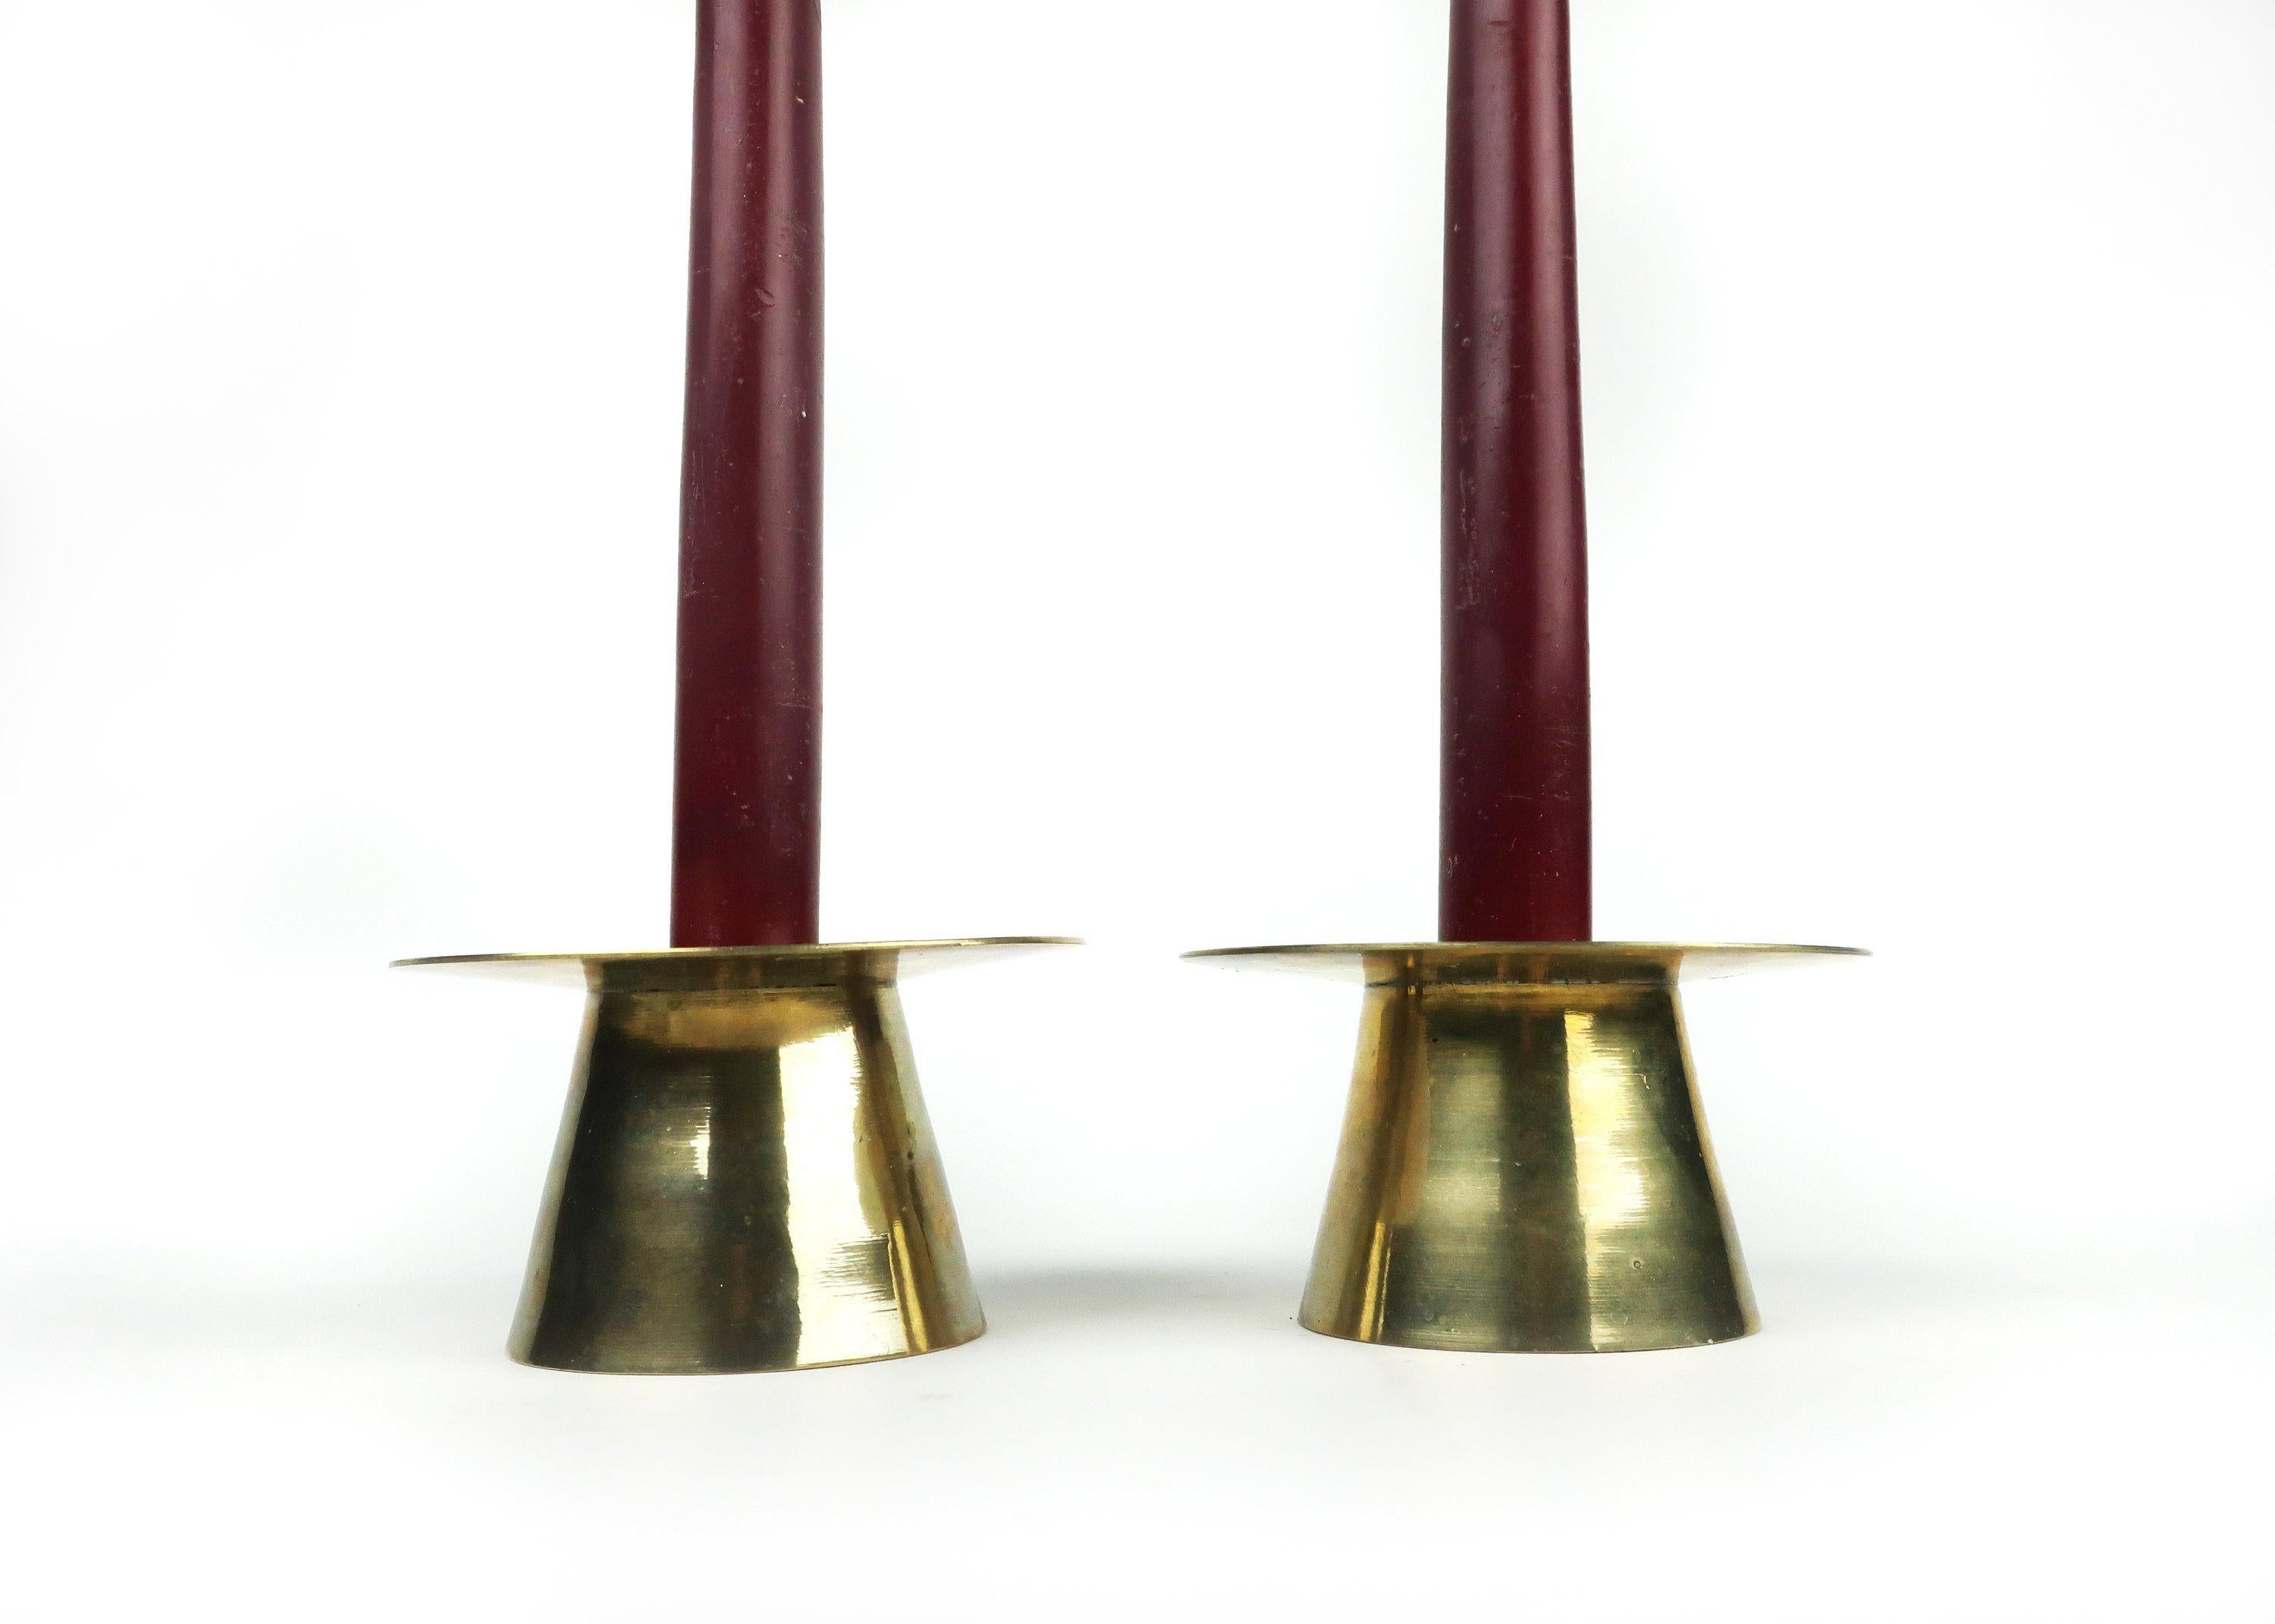 A pair of lovely midcentury or Danish modern brass candle holders with tapered cylindrical bases and wide plate top to catch dripping wax. Each has a removable insert for using with multiple sized candles.

In excellent condition. Designer and